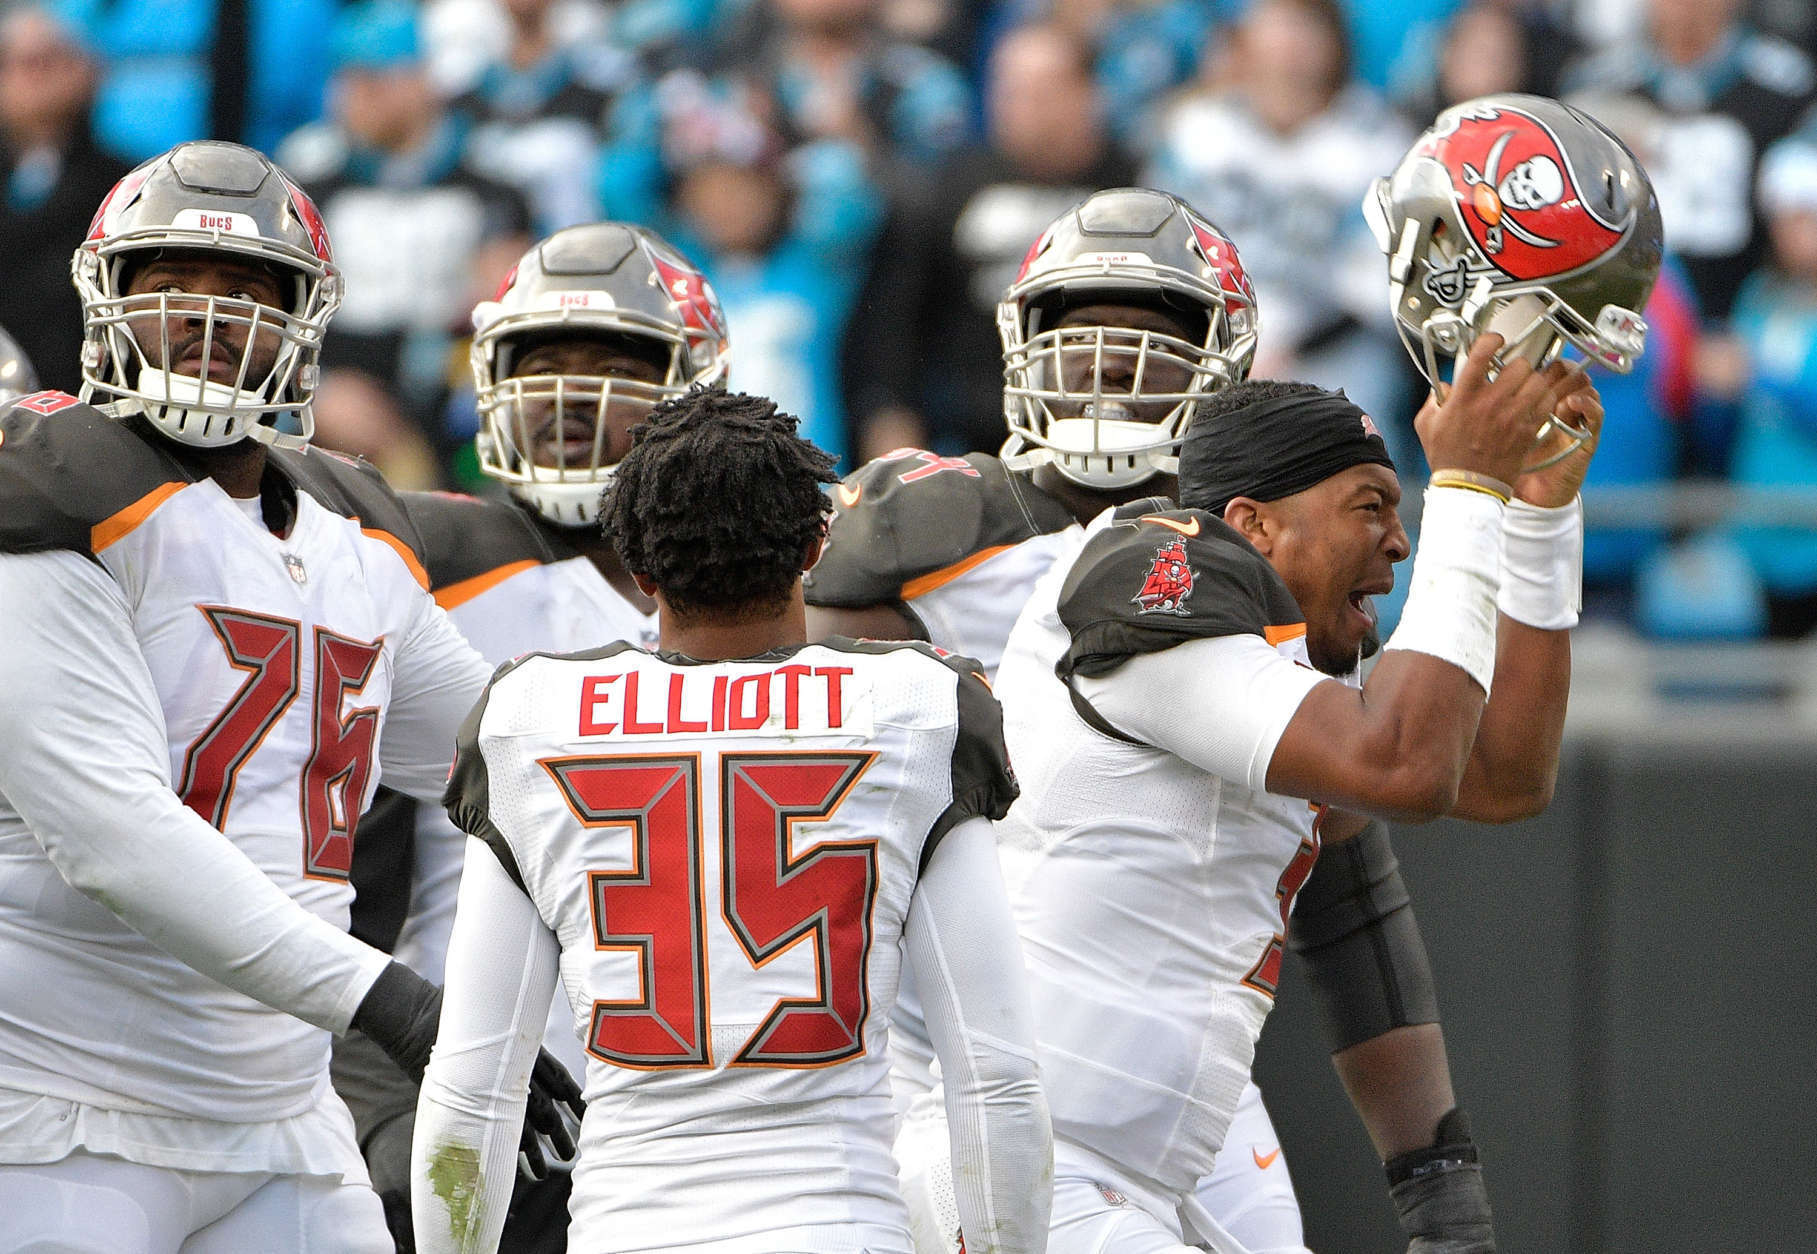 CHARLOTTE, NC - DECEMBER 24:  Jameis Winston #3 of the Tampa Bay Buccaneers reacts after fumbling during the final minute of their game against the Carolina Panthers at Bank of America Stadium on December 24, 2017 in Charlotte, North Carolina.  (Photo by Grant Halverson/Getty Images)